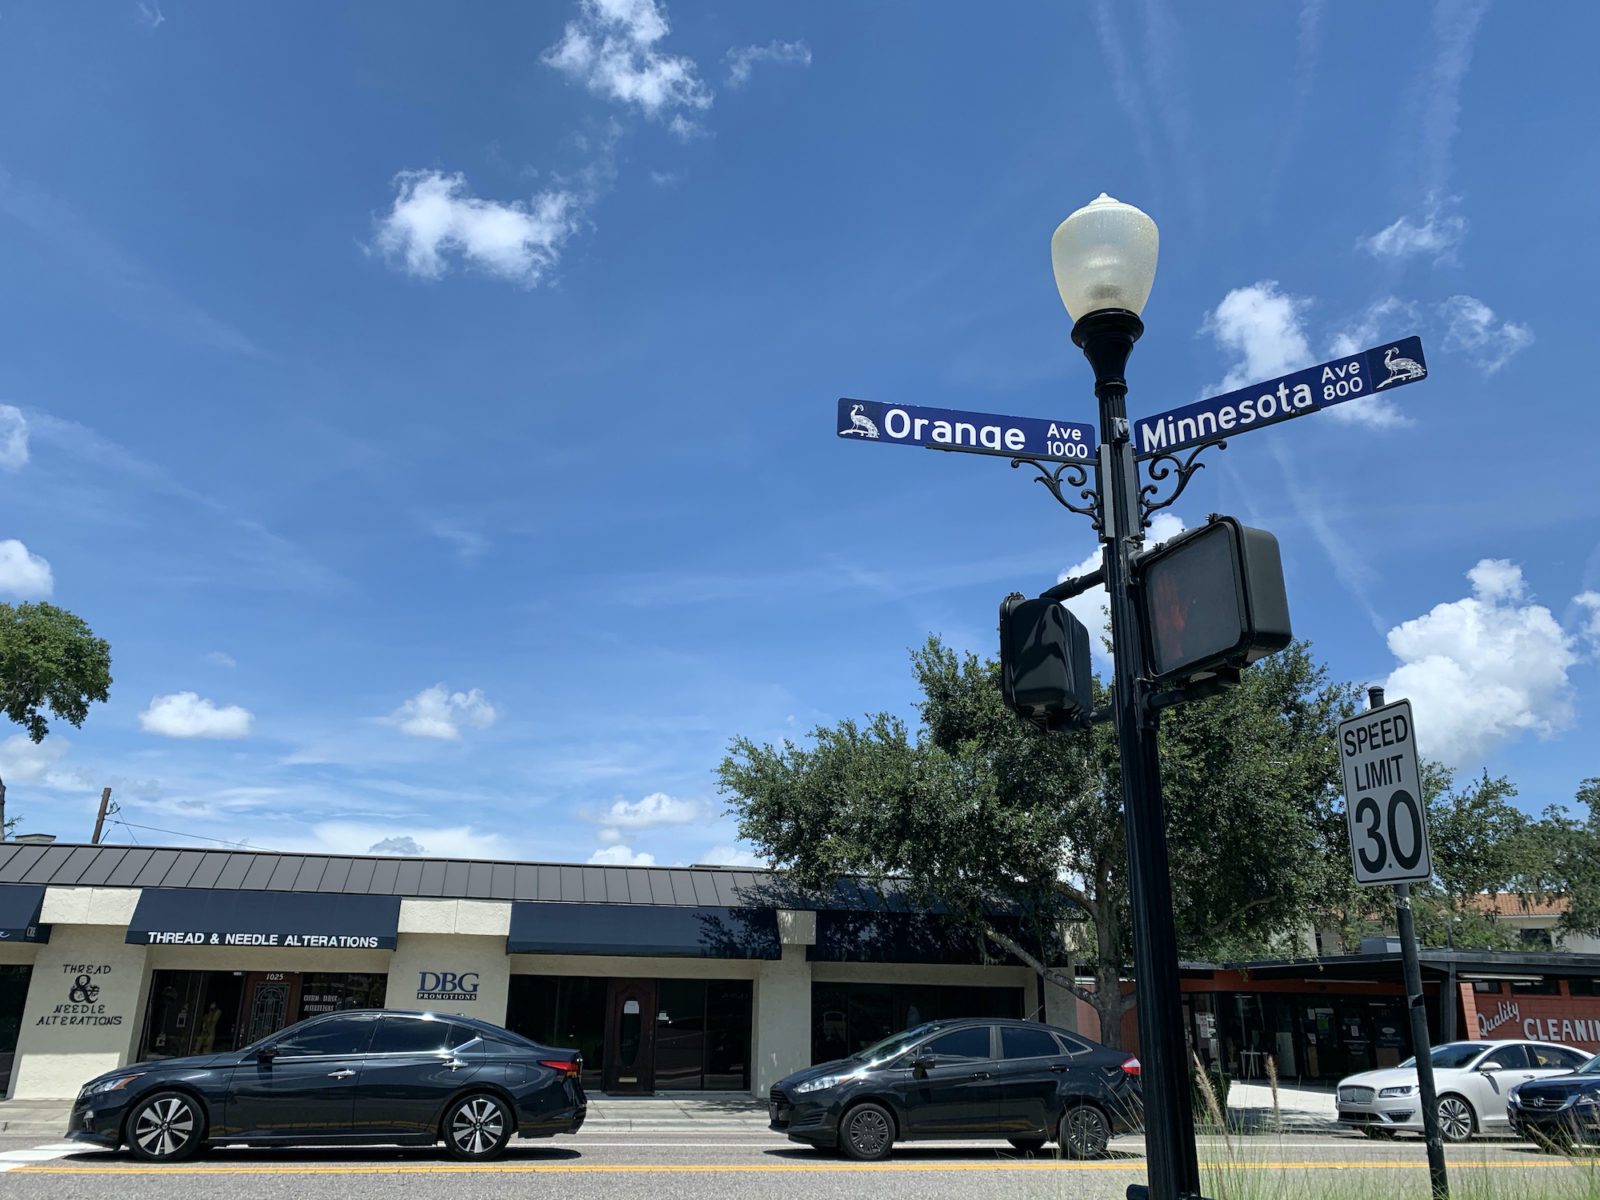 The intersection at Orange and Minnesota Avenues in Winter Park, Fla.